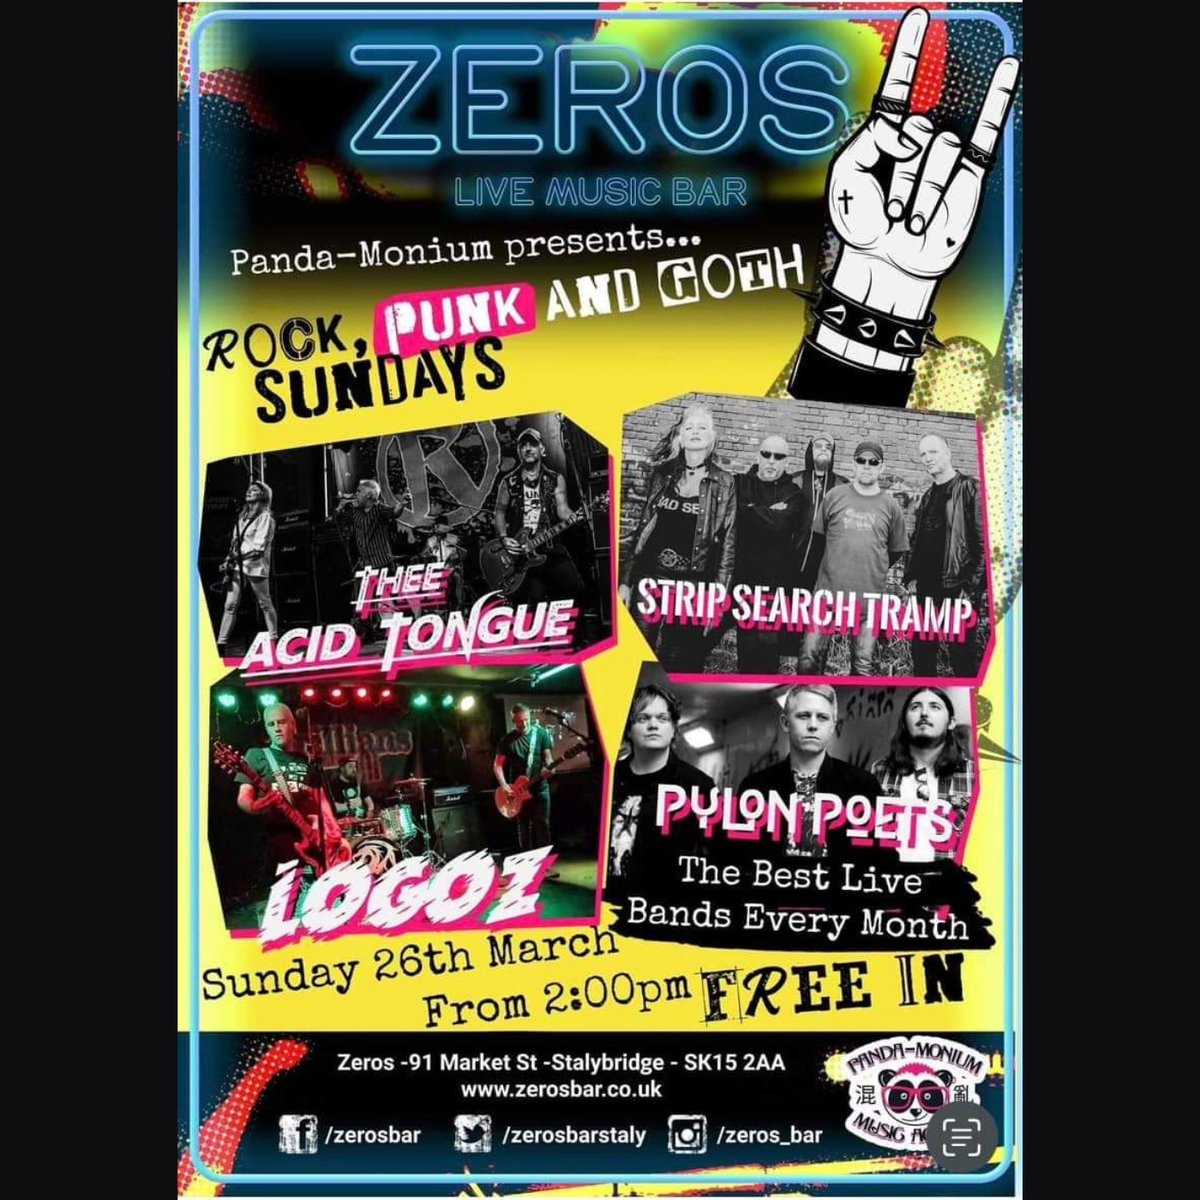 Also up this weekend and looking forward to our first trip to @zerosbarstaly #stalybridge with @theeacidtongue #StripSearchTramp and @PylonPoets ! #PandaMoniumMusicAgency 

@LoGOz_UK @PeeshNE63 @PaulLoGOz